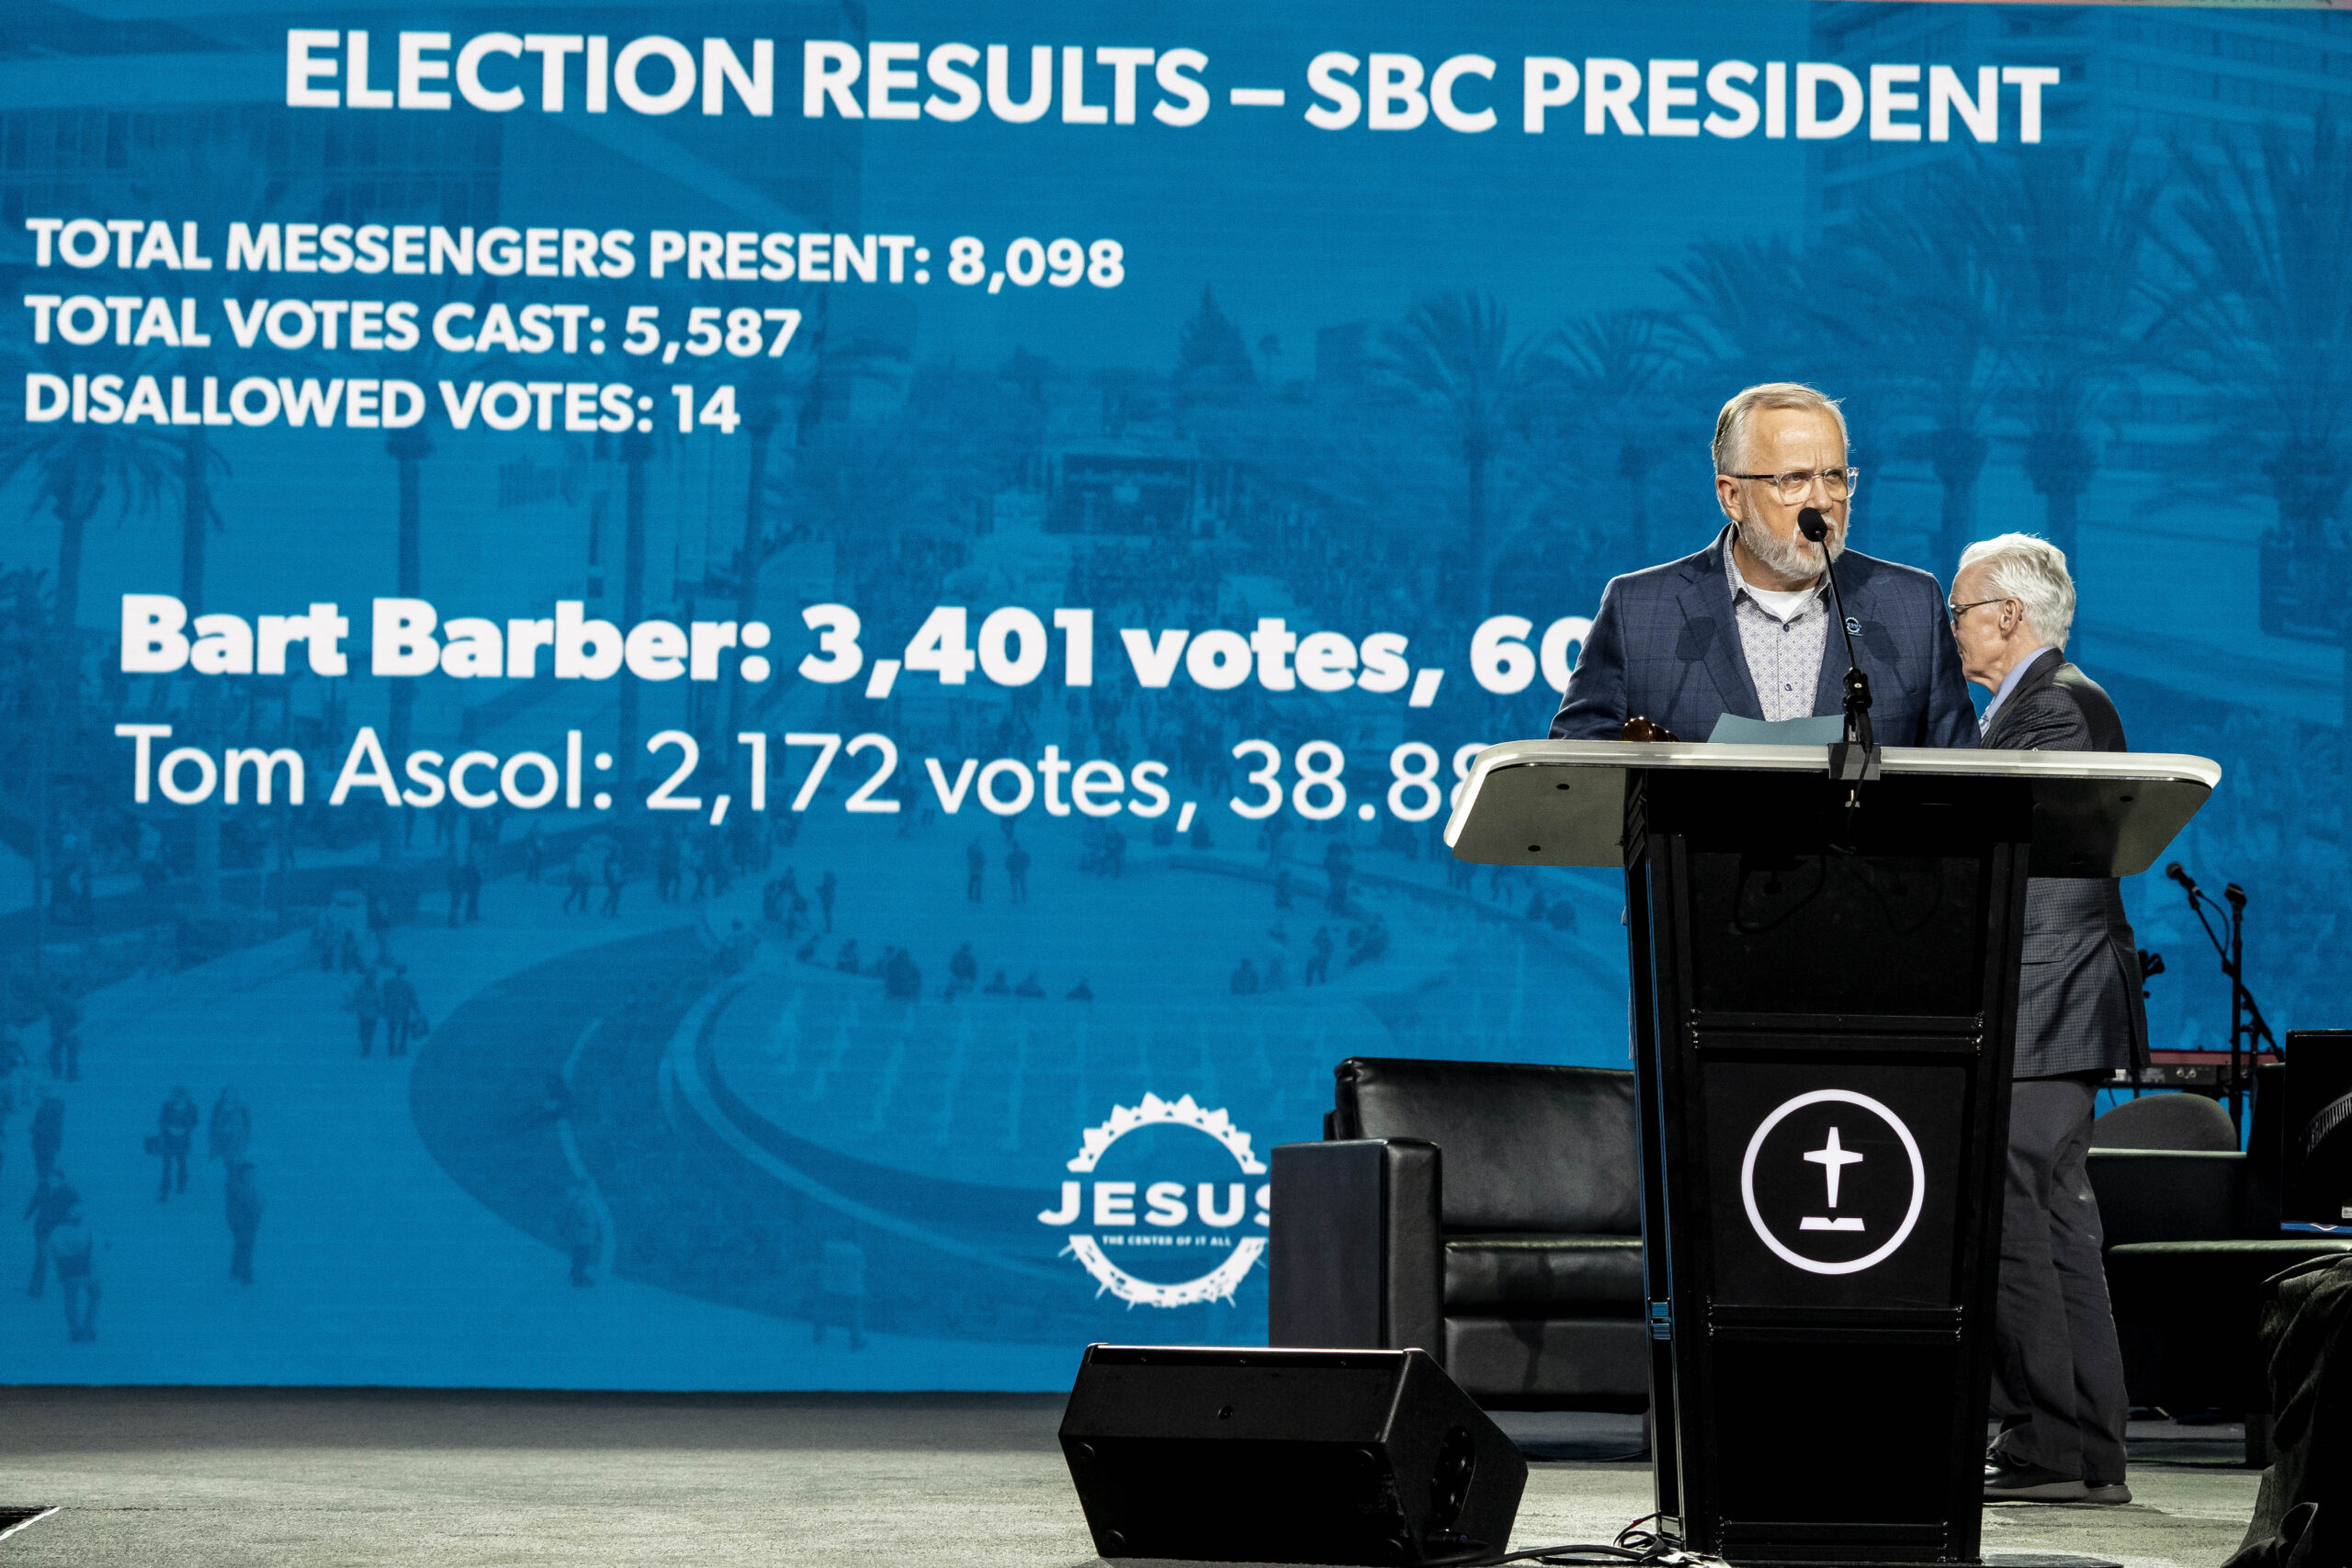 Bart Barber is elected the Southern Baptist Convention president during the Southern Baptist Convention, held at the Anaheim Convention Cener in Anaheim, California, on Tuesday, June 14, 2022. Photo by Justin L. Stewart/Religion News Service